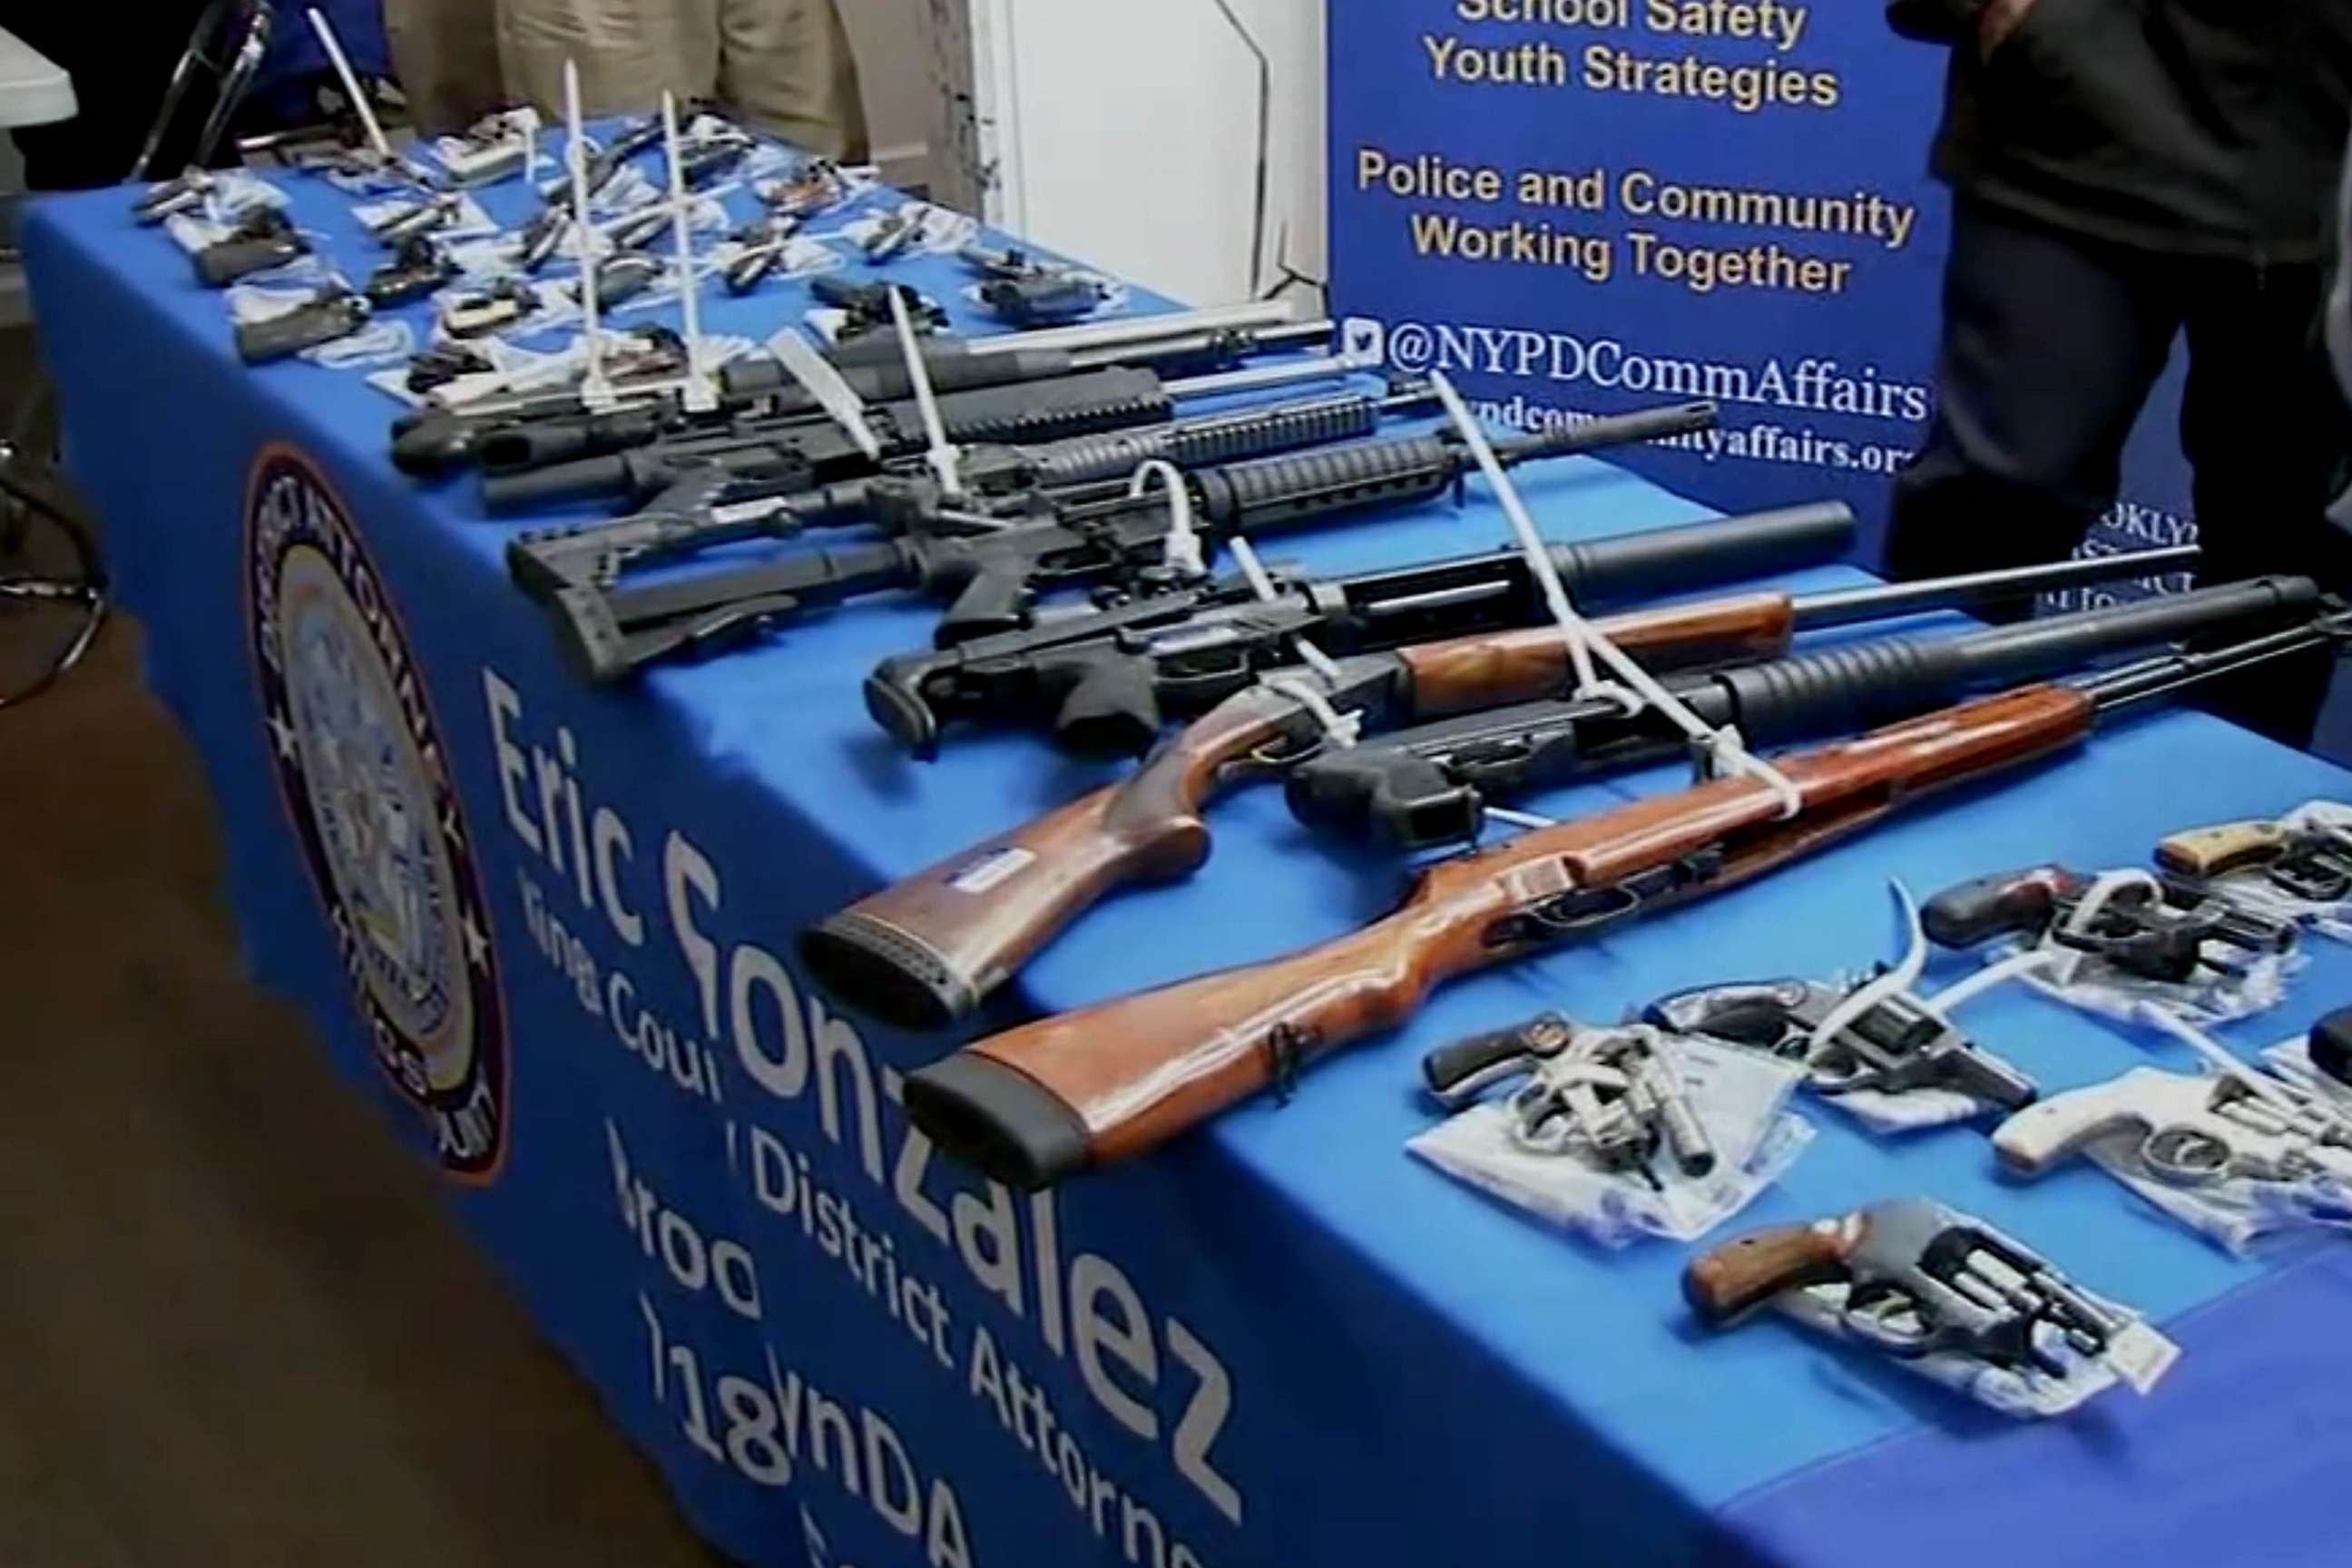 PHOTO: It was part of a statewide gun buyback event organized by New York Attorney General Letitia James.